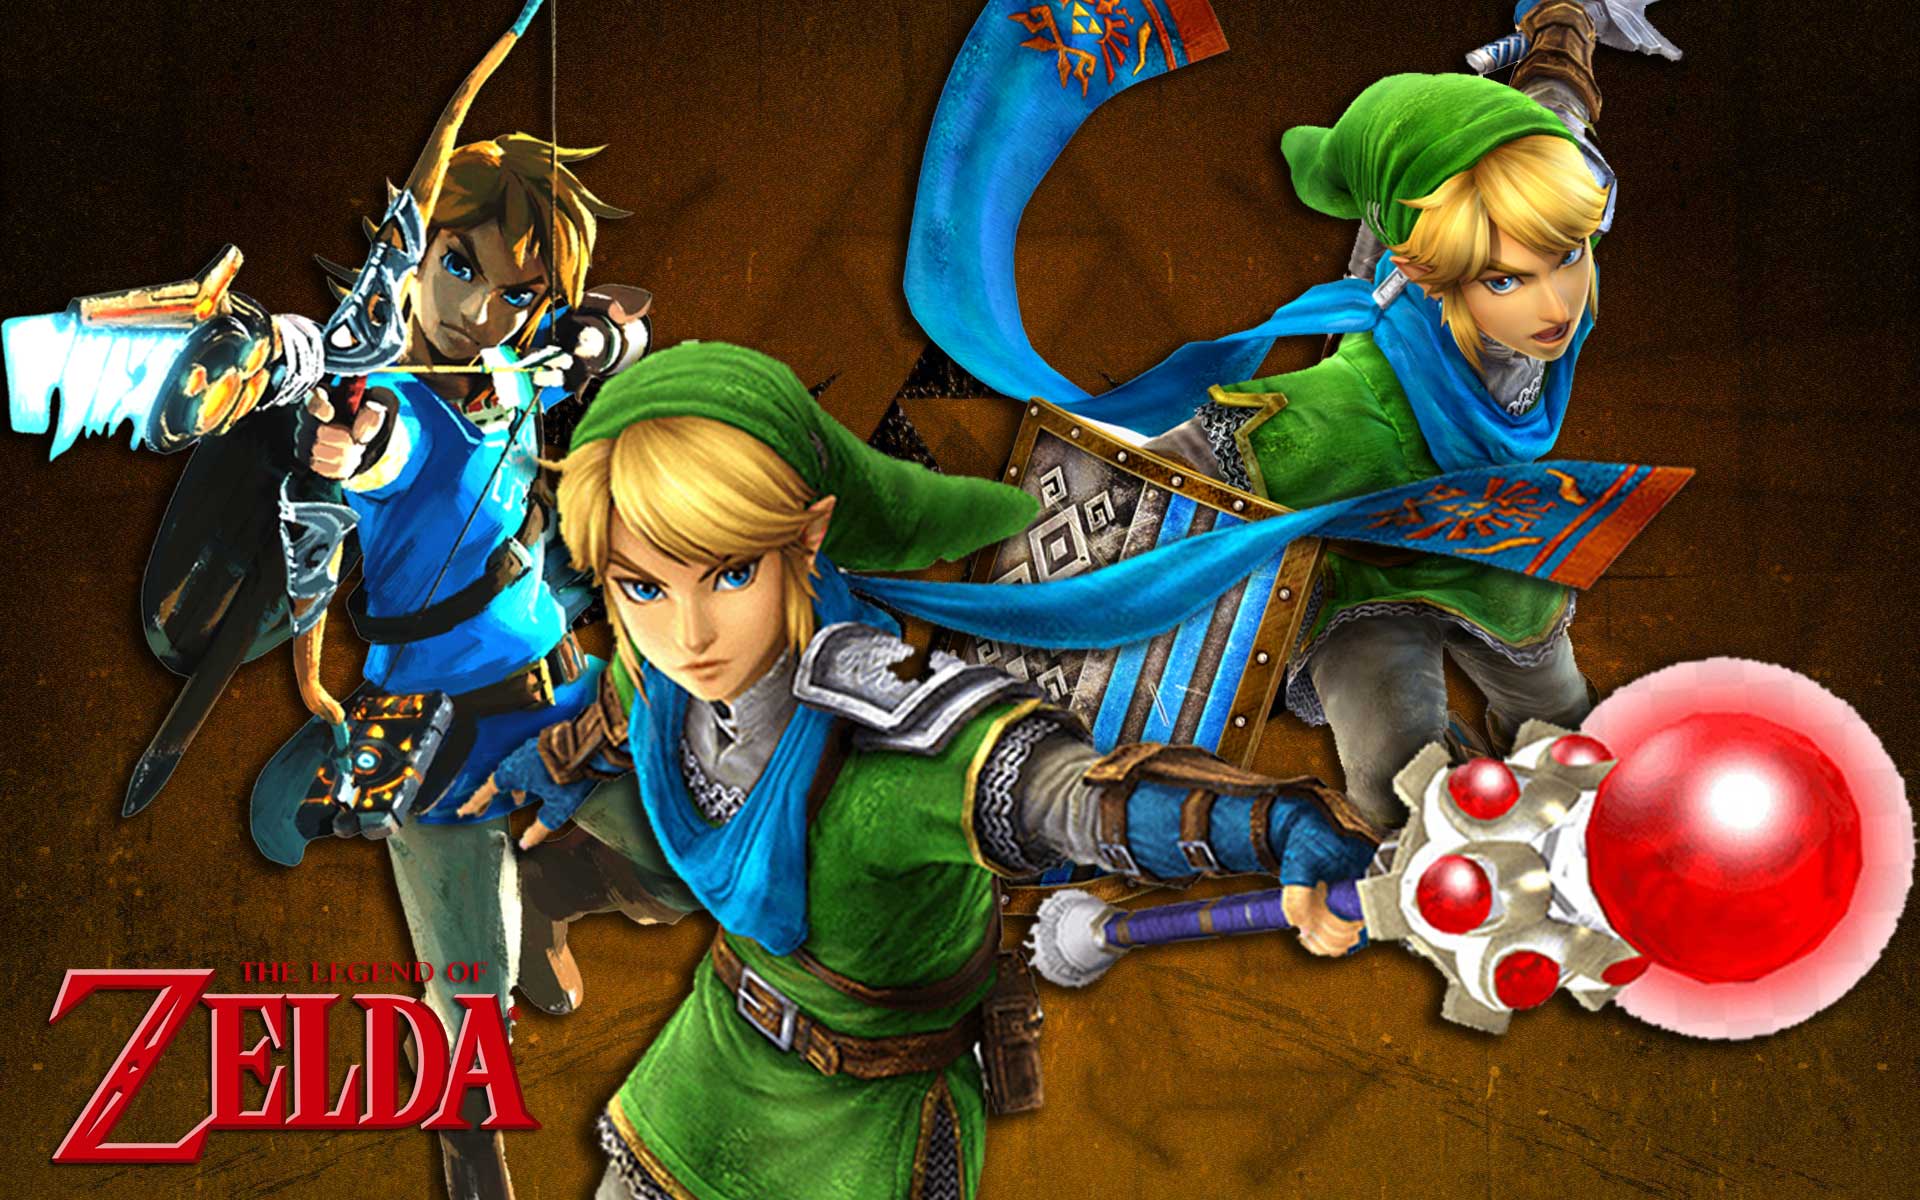 The Legend Of Zelda Wallpapers Hd New Tab Themes Backgrounds